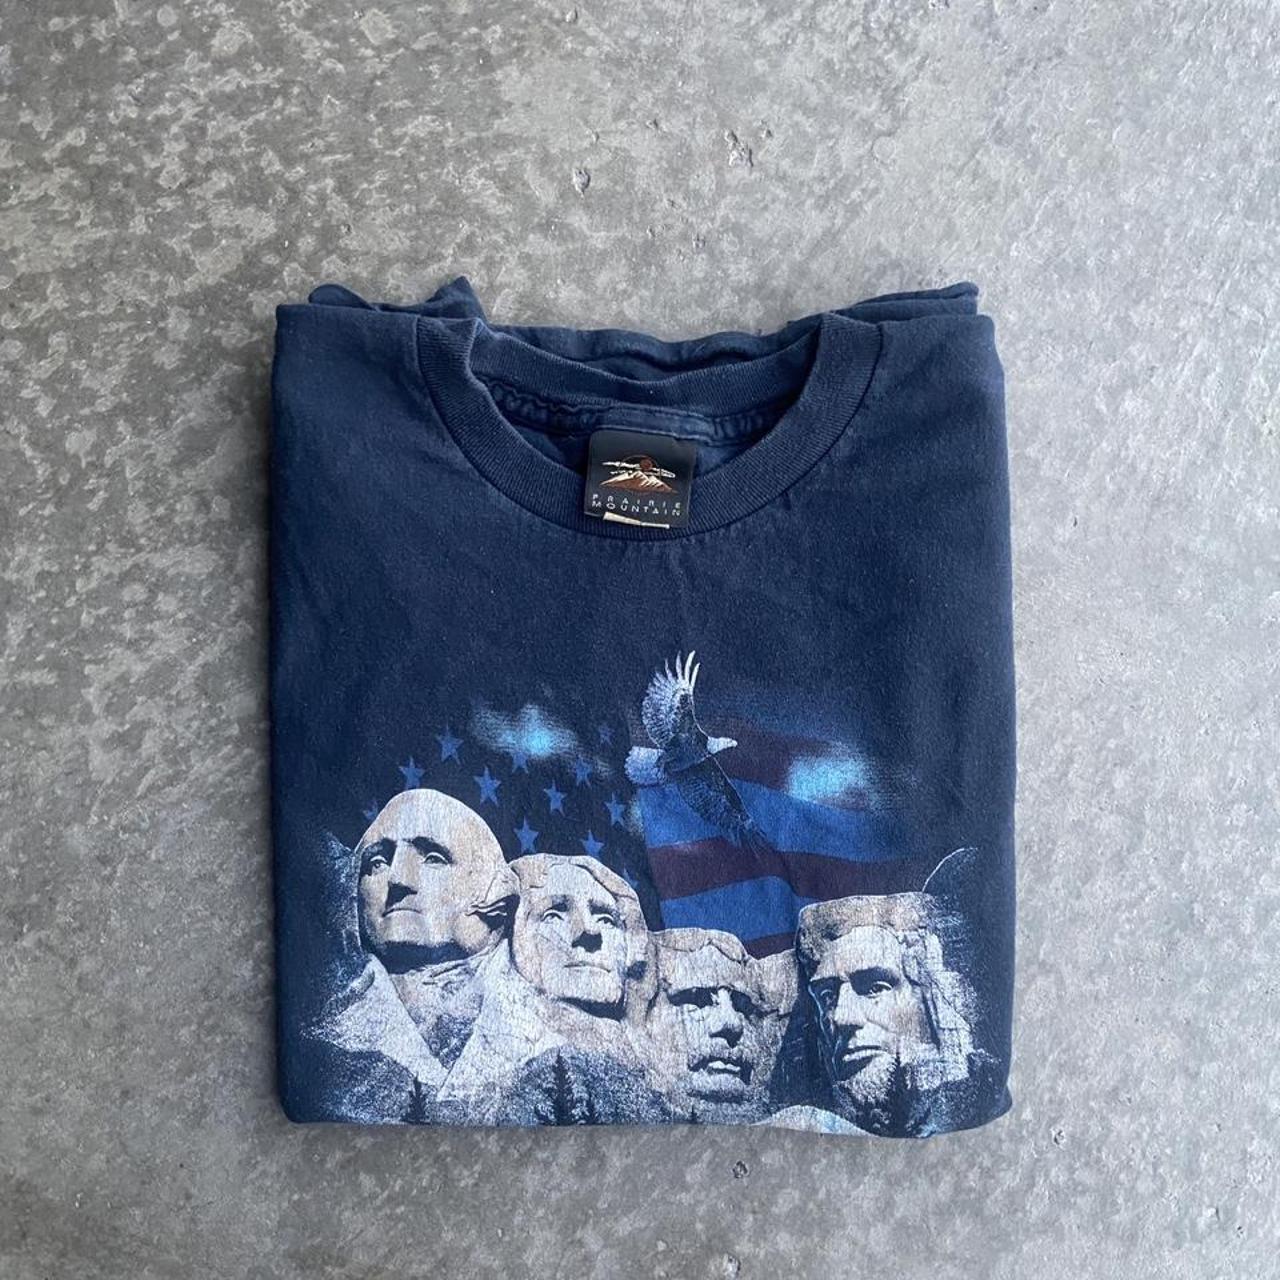 Product Image 1 - Praire Mountain-Mount Rushmore Tee
Excellent condition